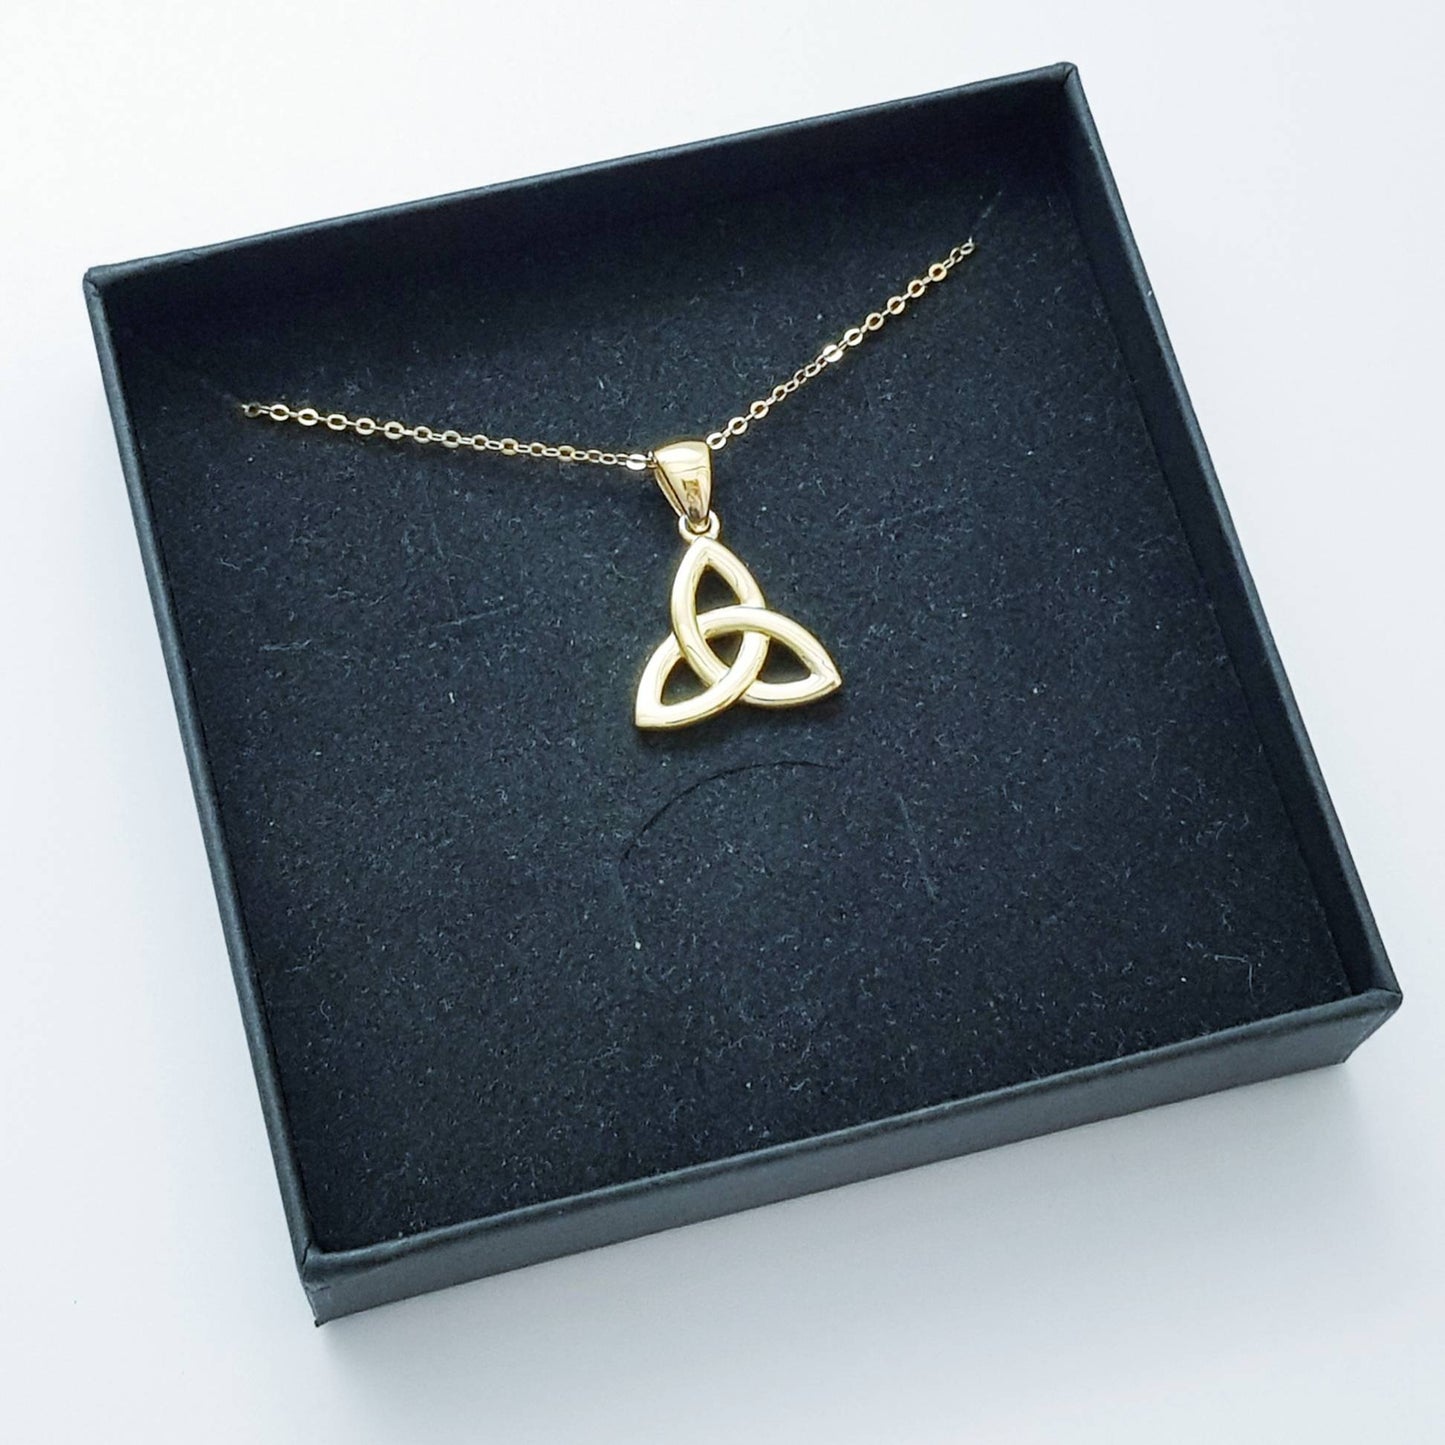 Trinity knot pendant, celtic necklace made in Ireland